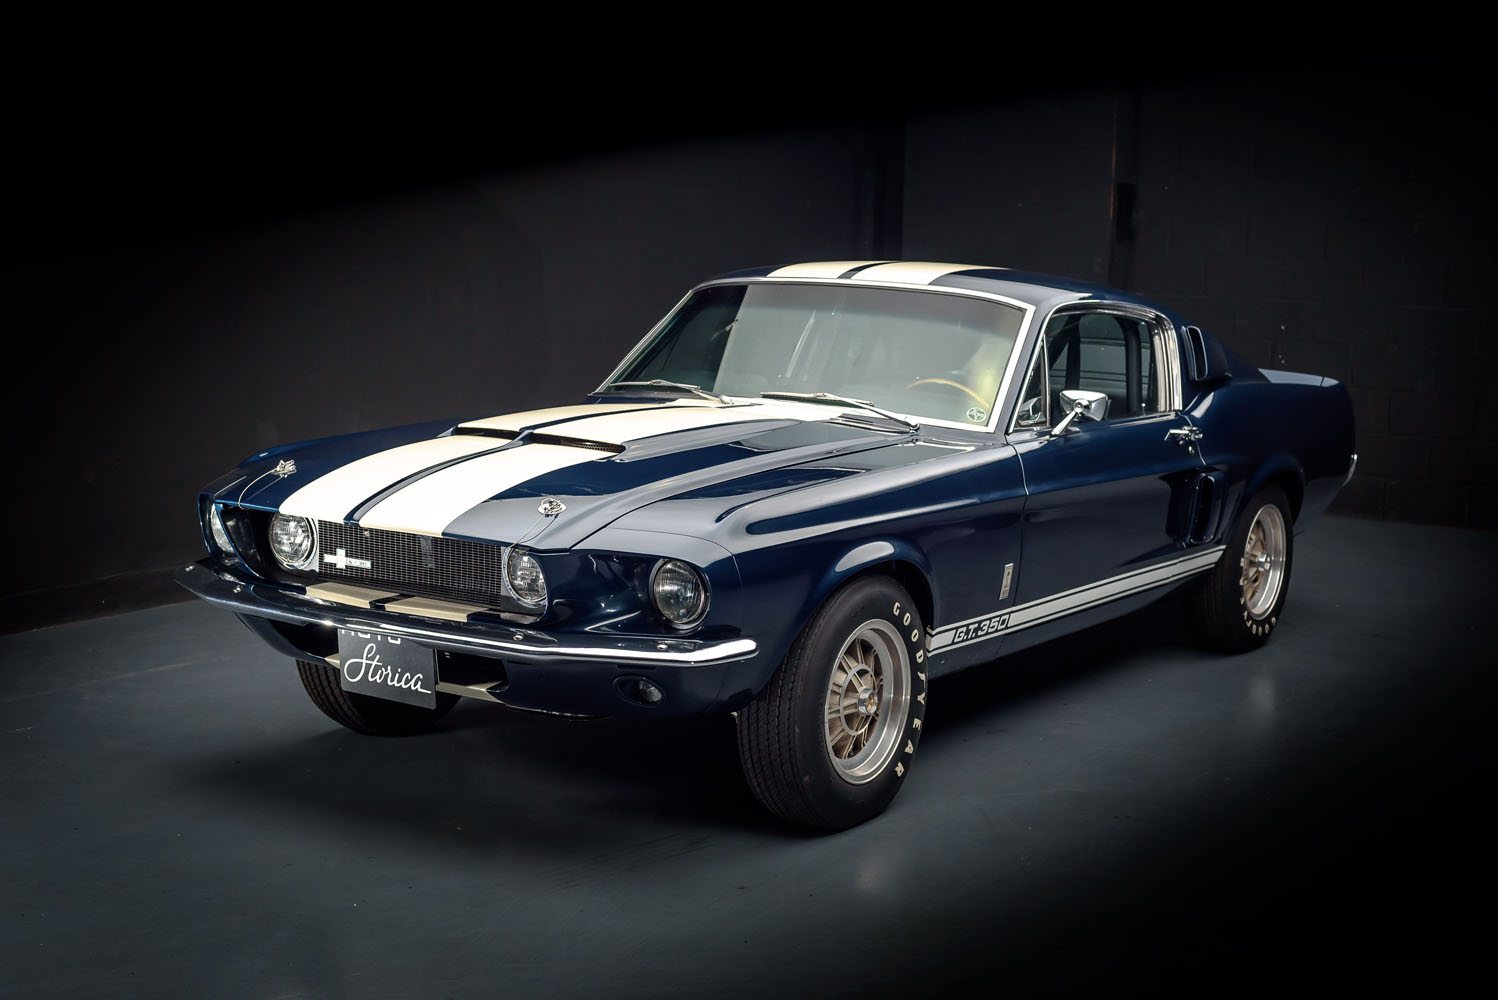 1967 Ford Mustang Fastback Gt350